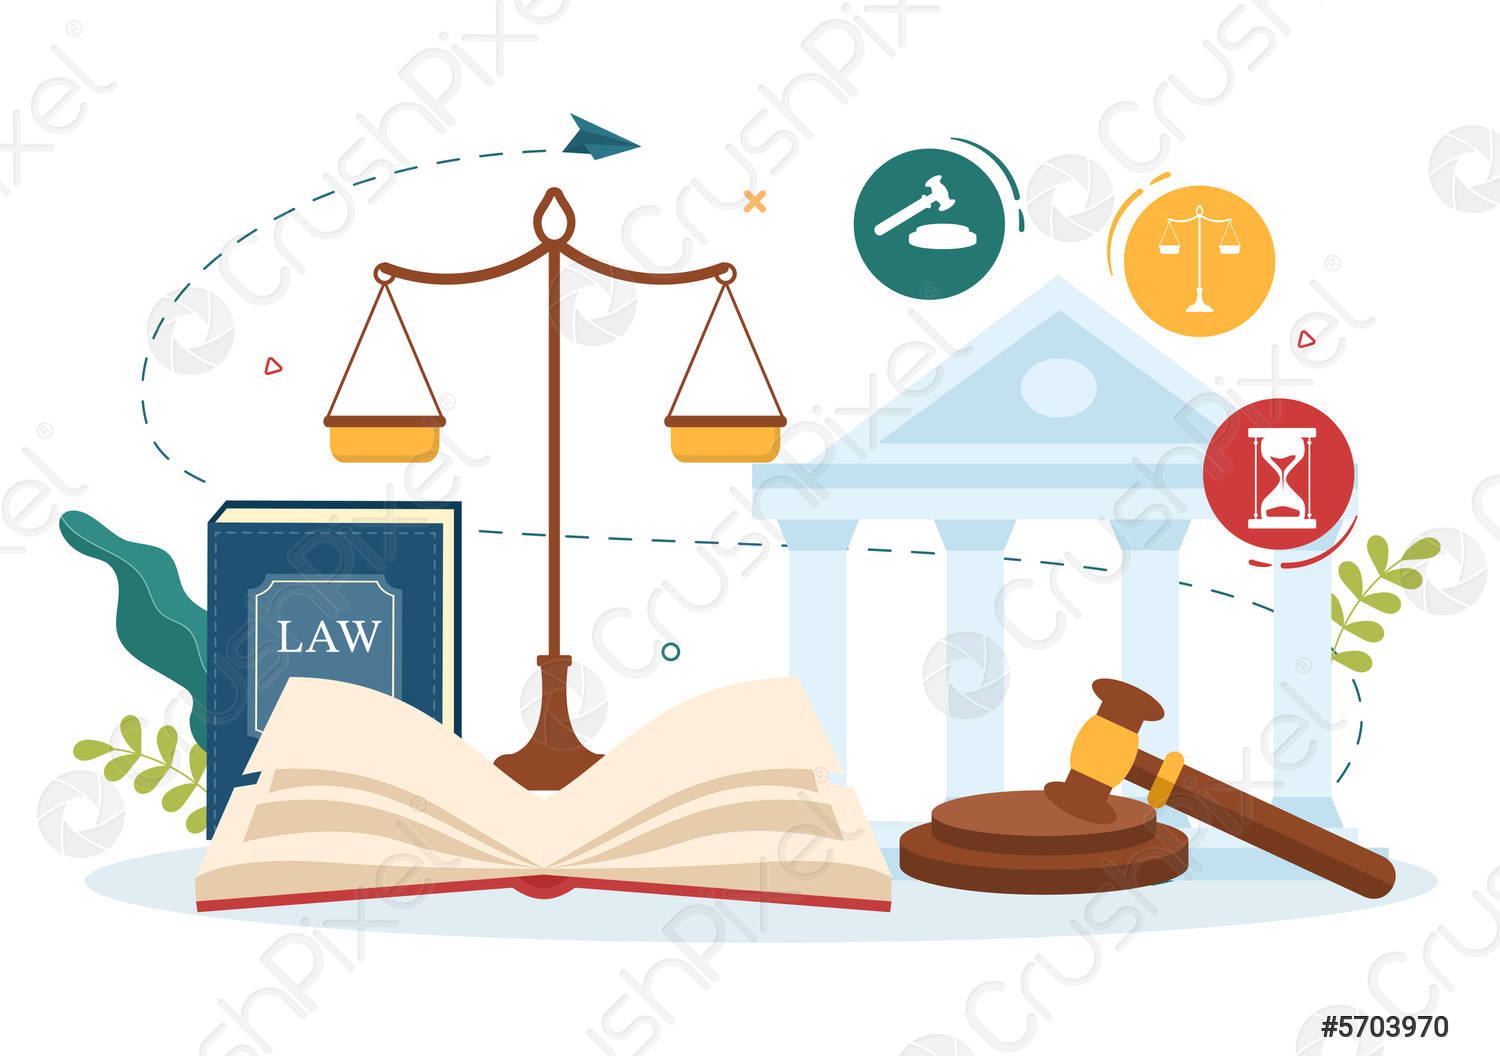 Law Firm SEO Services for Growing Your Law Firm’s Client Base